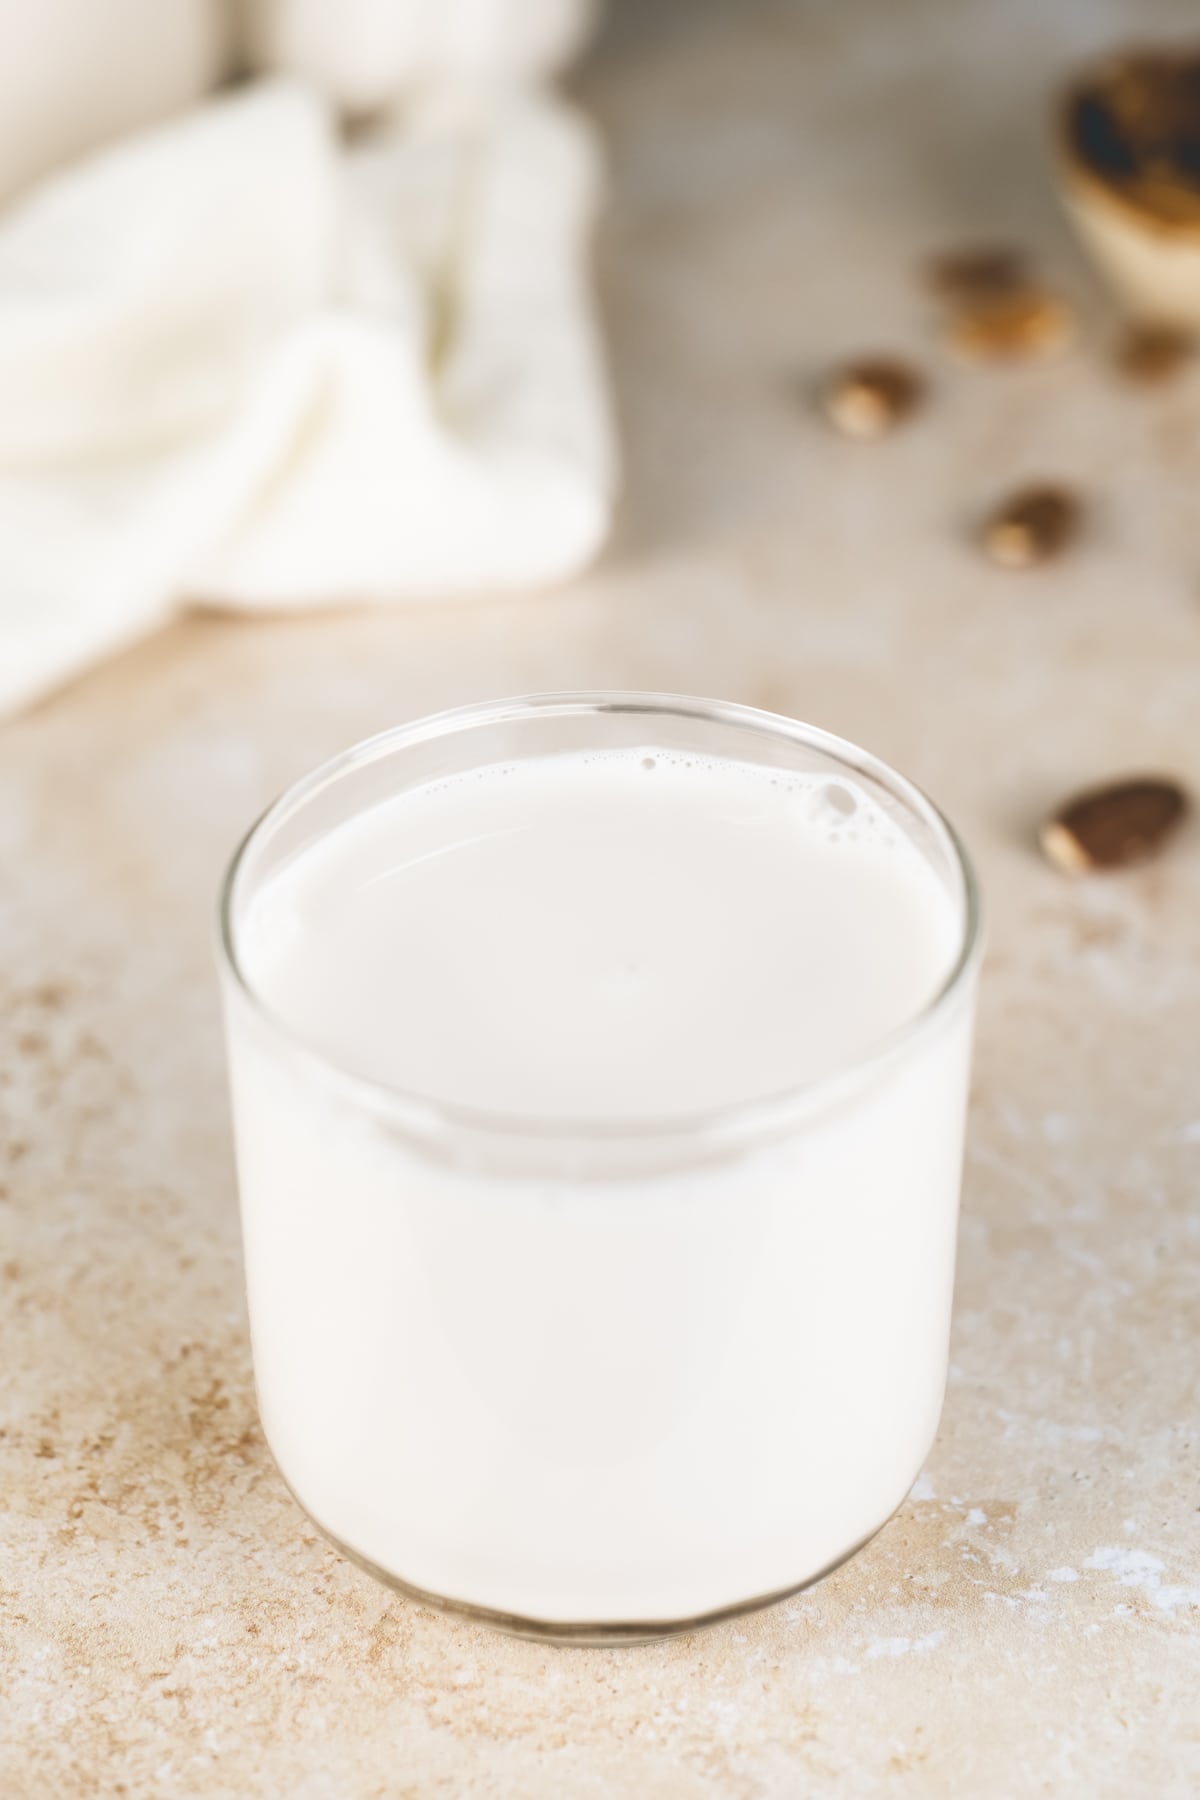 A full glass of milk in front of spilt raw almonds and white linen cloth.